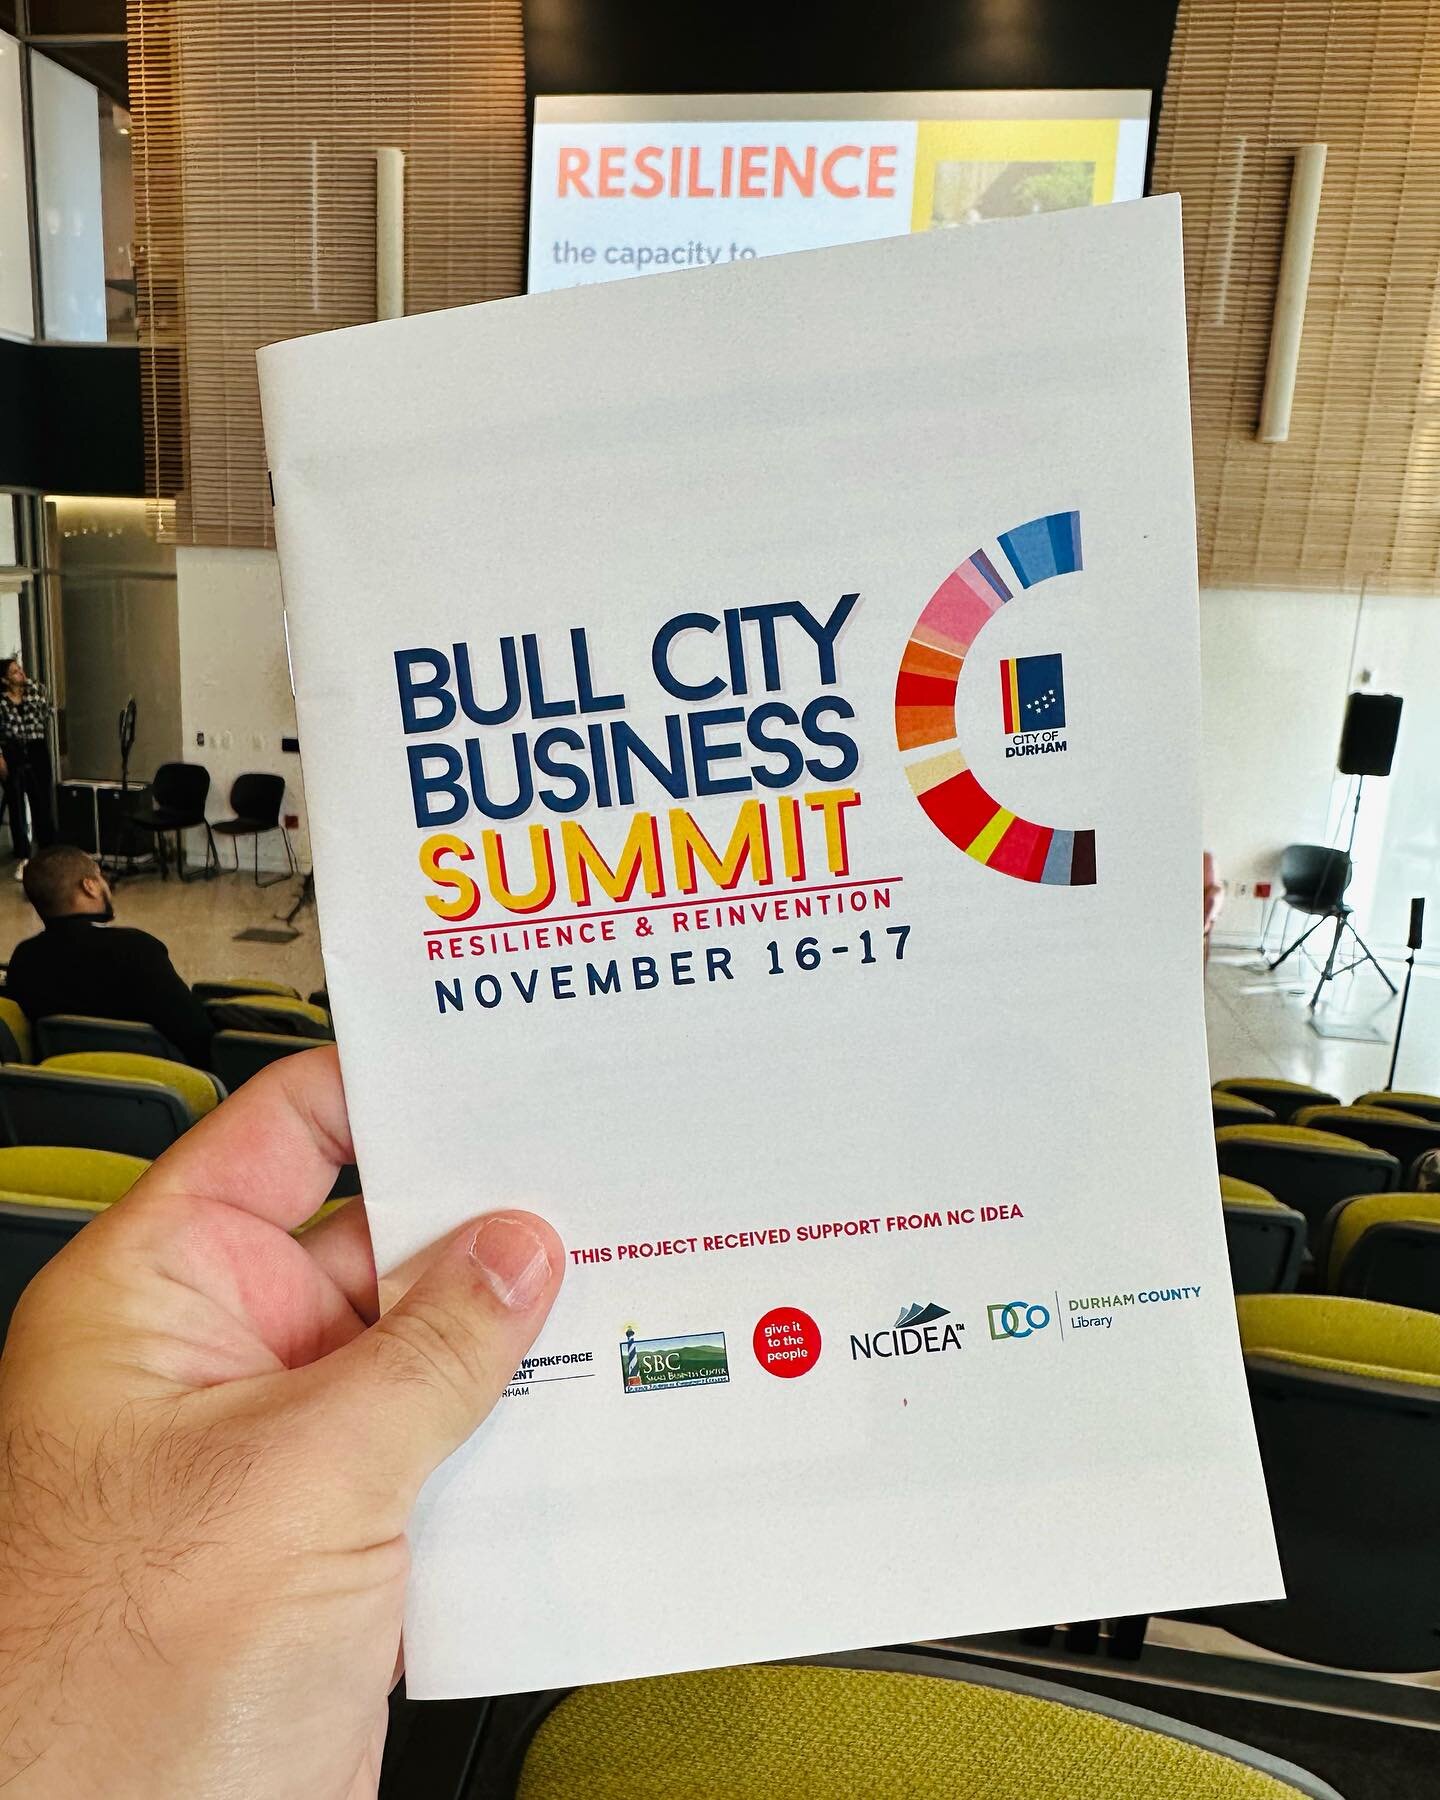 Really enjoyed the Bull City Business Summit Resilience &amp; Reinvention! Learned a ton and connected with some great folks. Being an entrepreneur can be a hard and isolated, but having a supportive community makes all the difference. Events like th